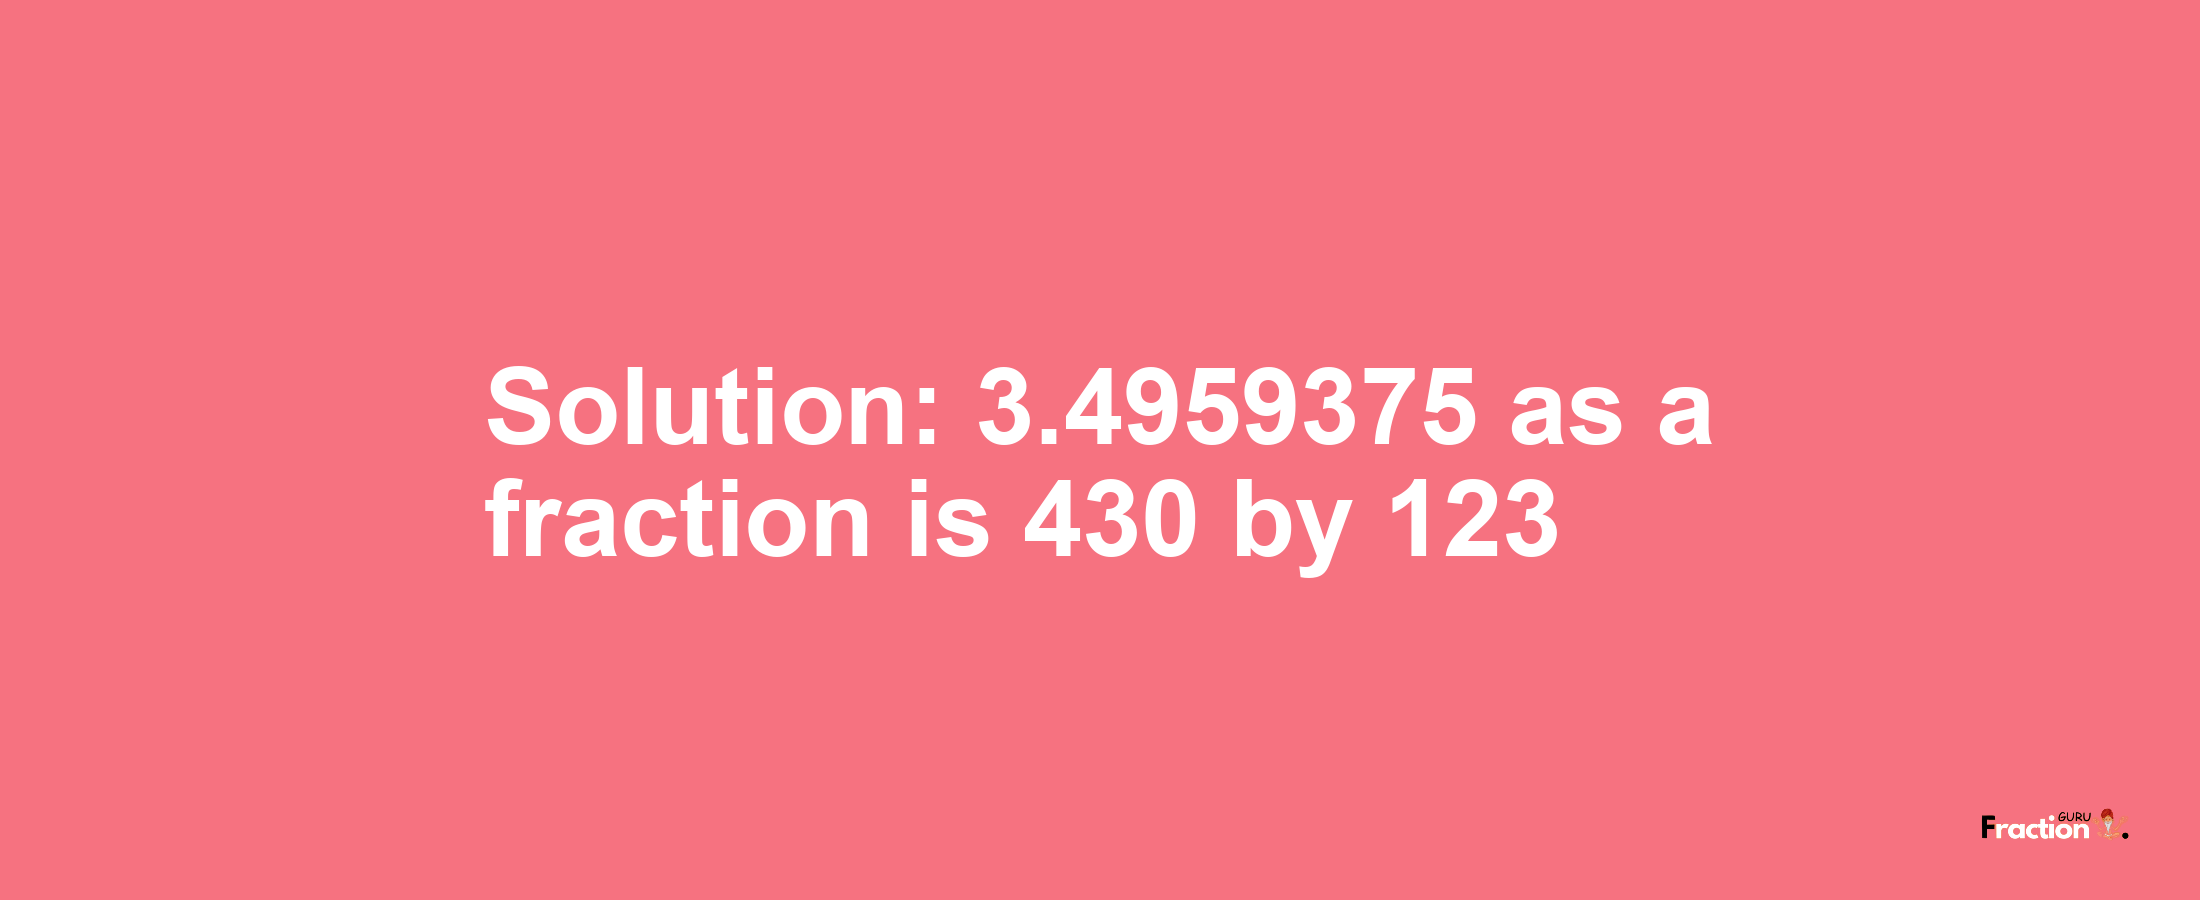 Solution:3.4959375 as a fraction is 430/123